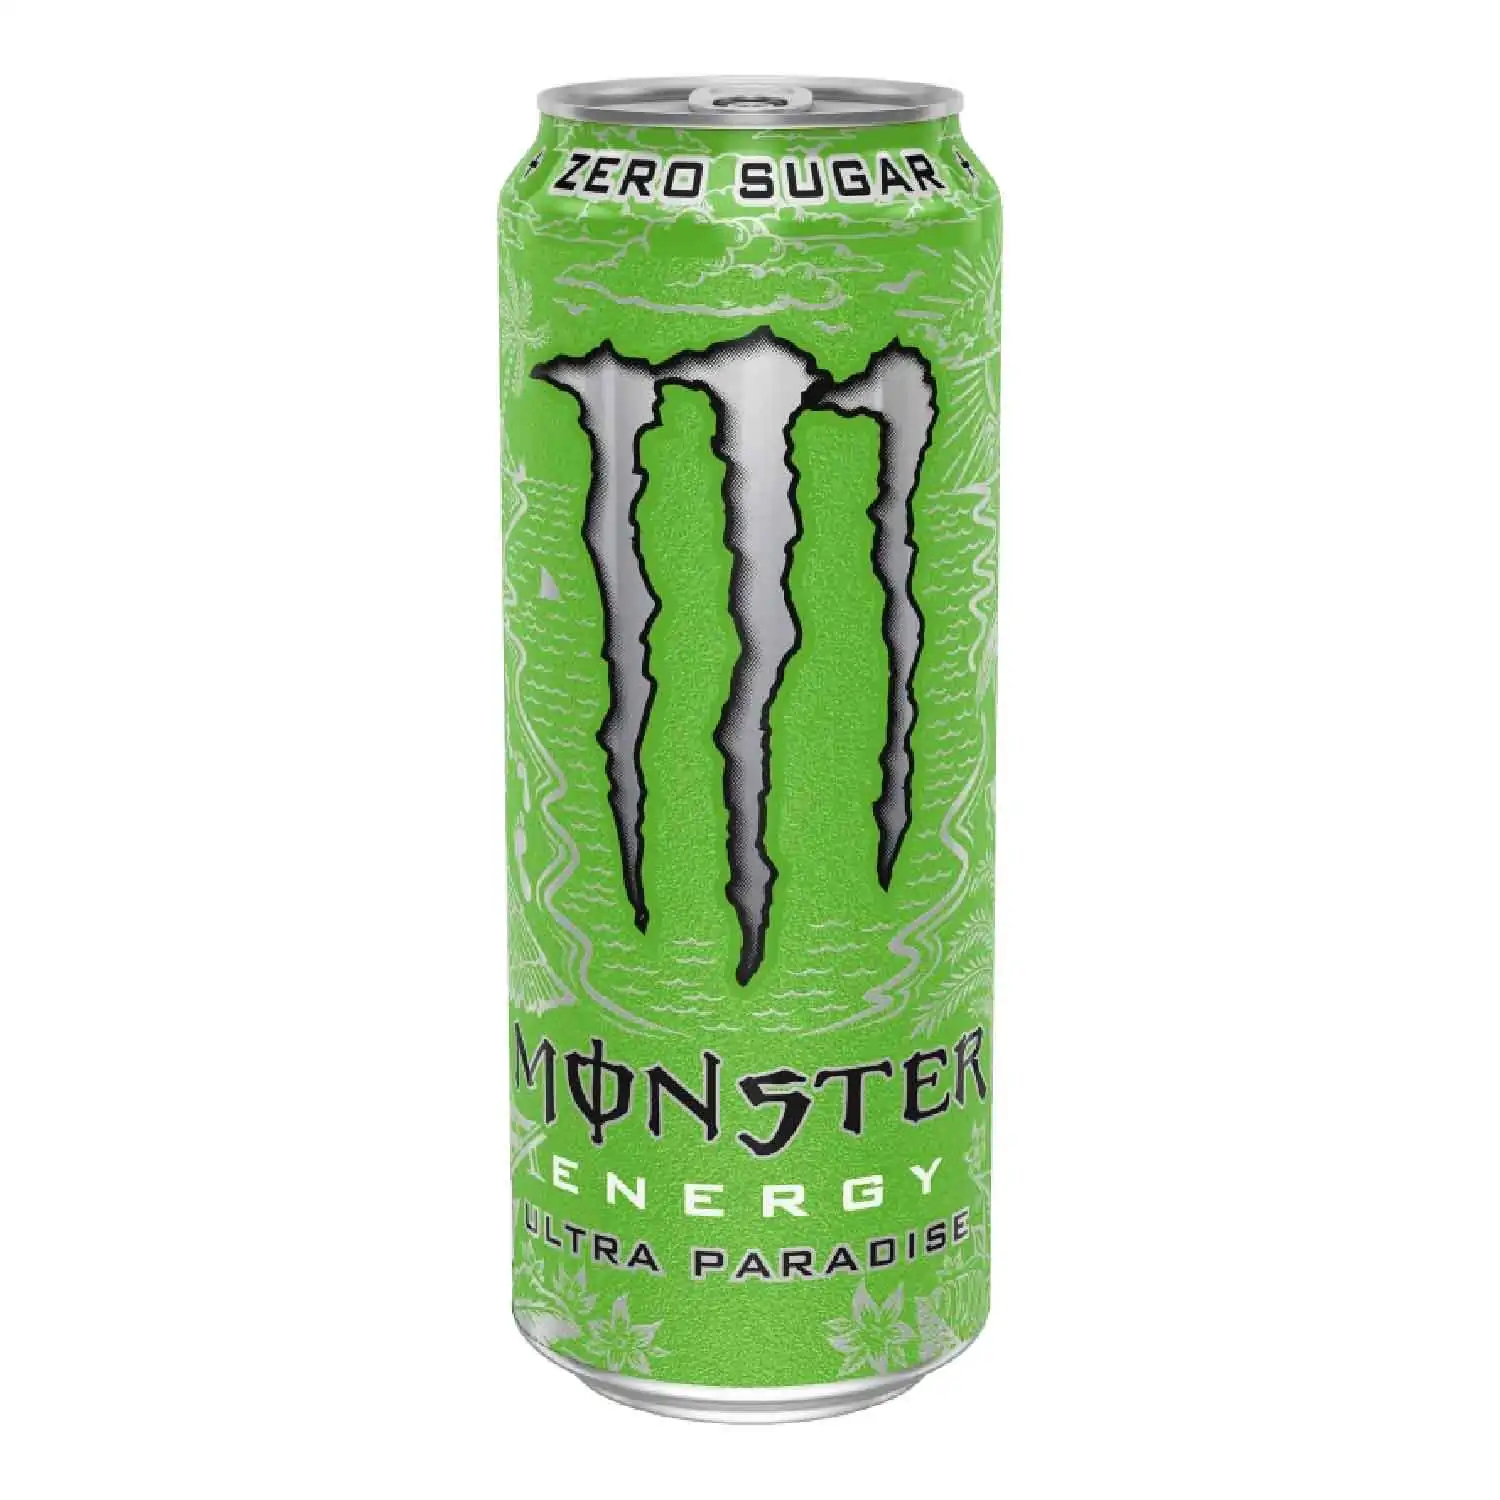 Monster ultra paradise 50cl - Buy at Real Tobacco